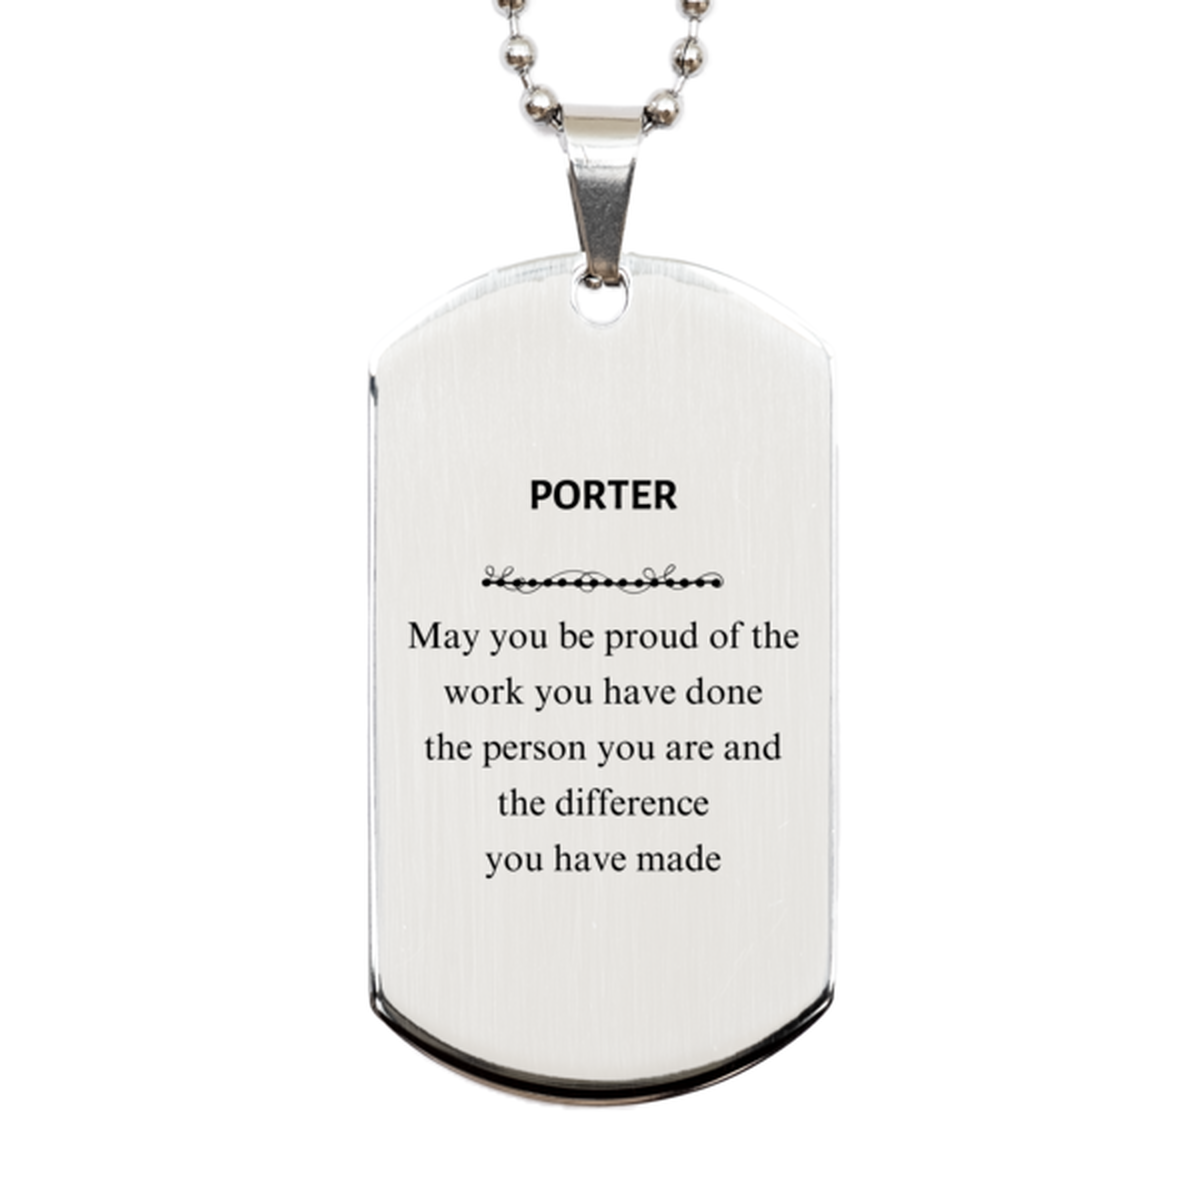 Porter May you be proud of the work you have done, Retirement Porter Silver Dog Tag for Colleague Appreciation Gifts Amazing for Porter